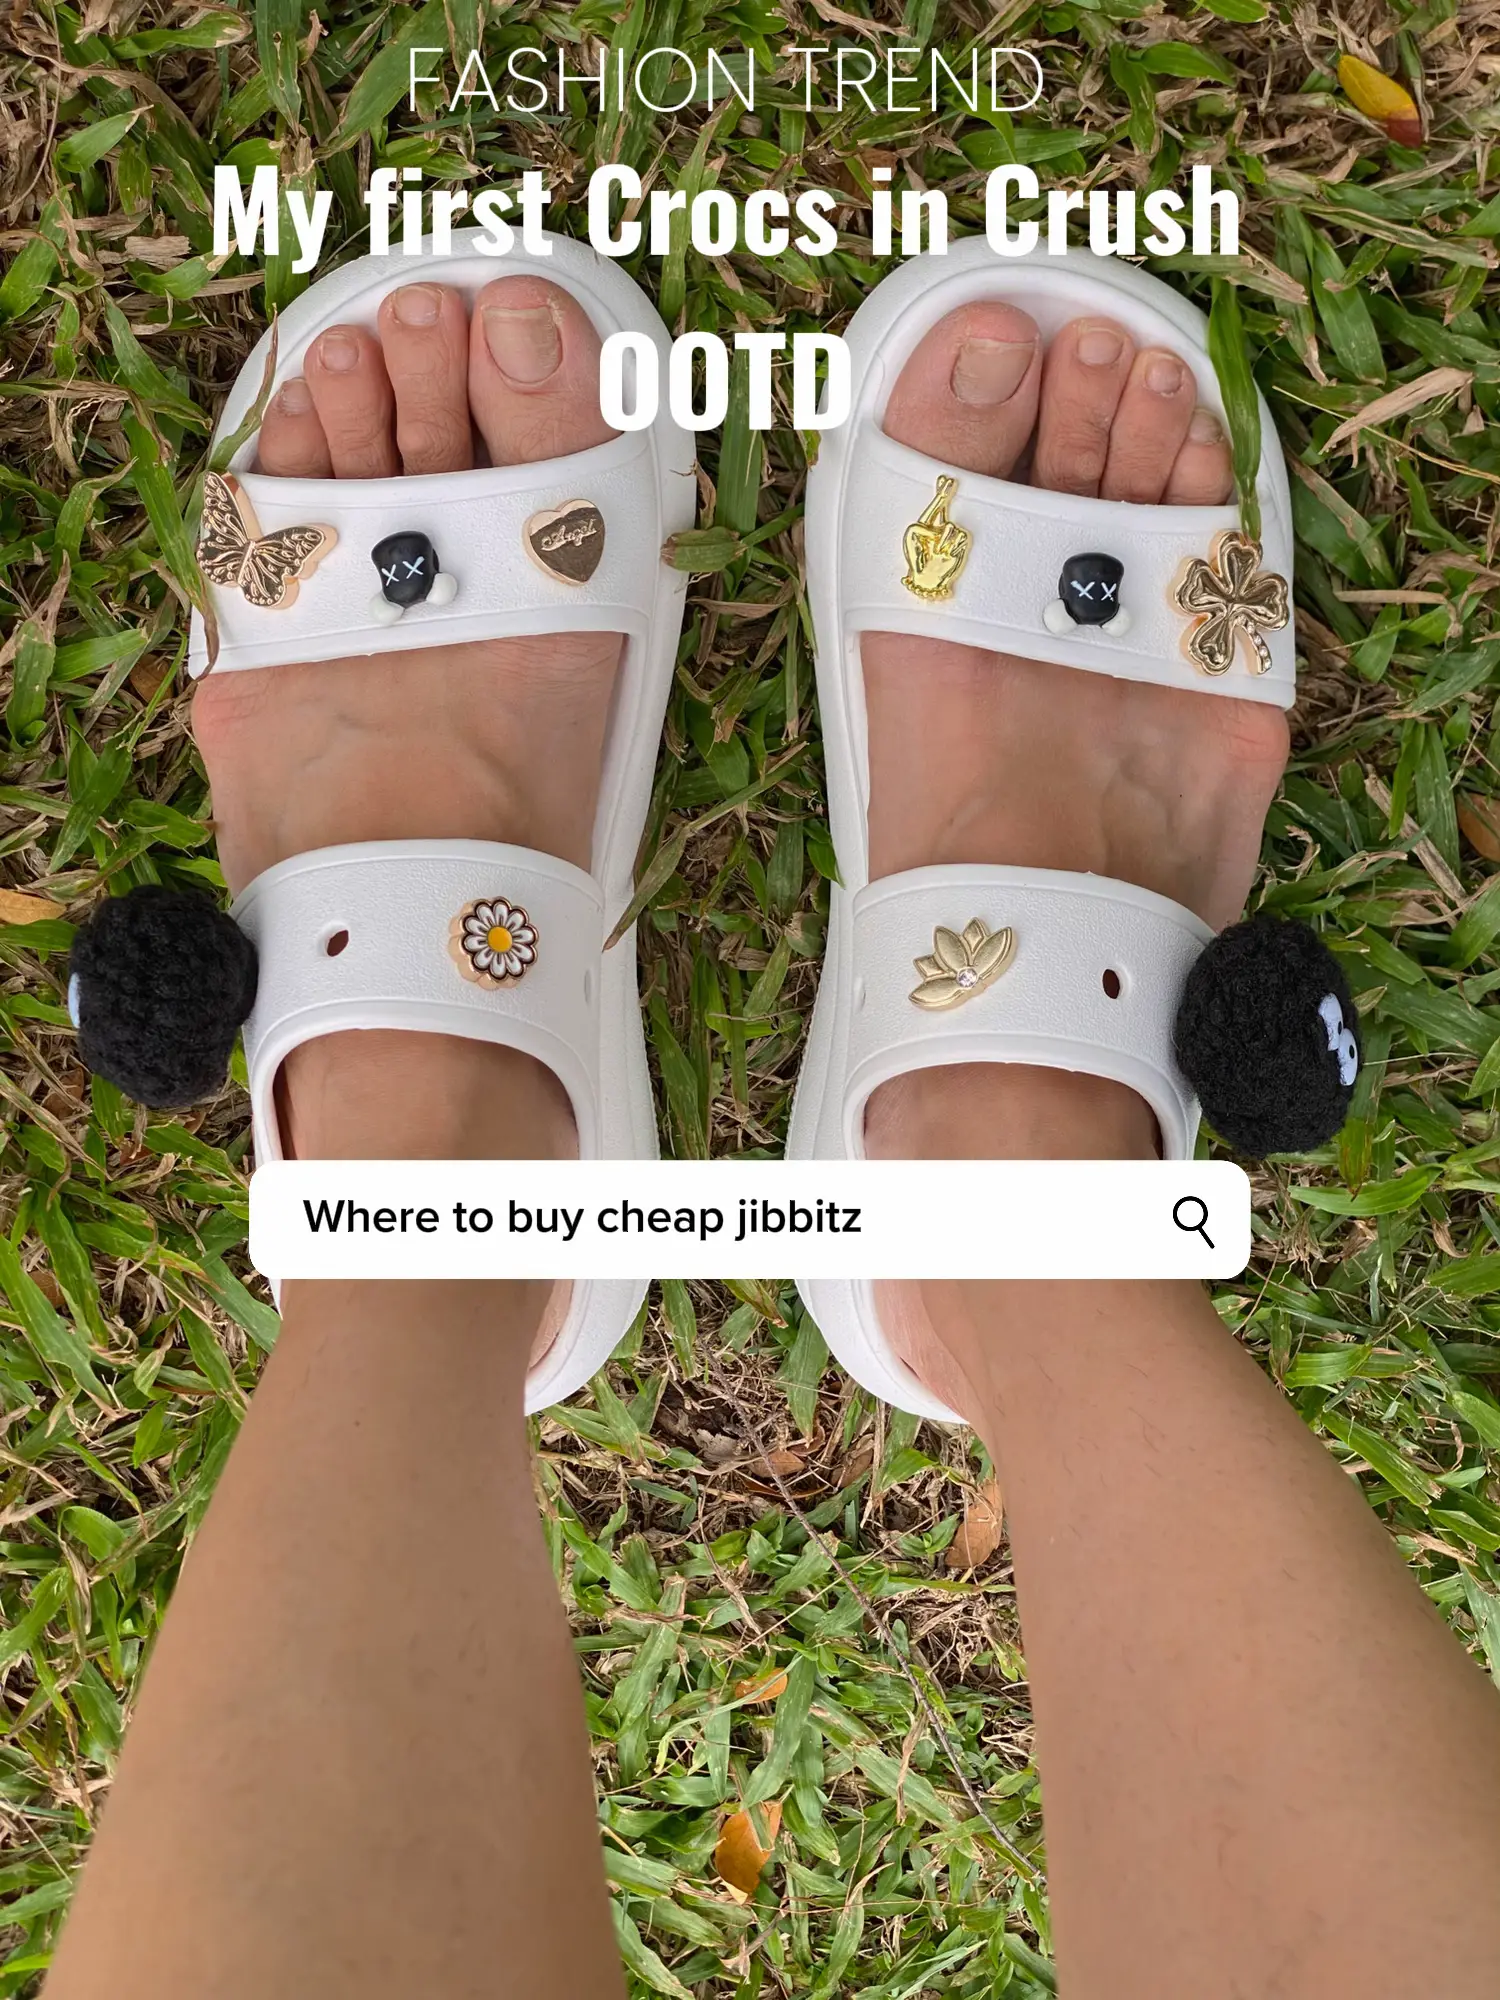 all jibbitz are just from the crocs store!! so glad i finally have